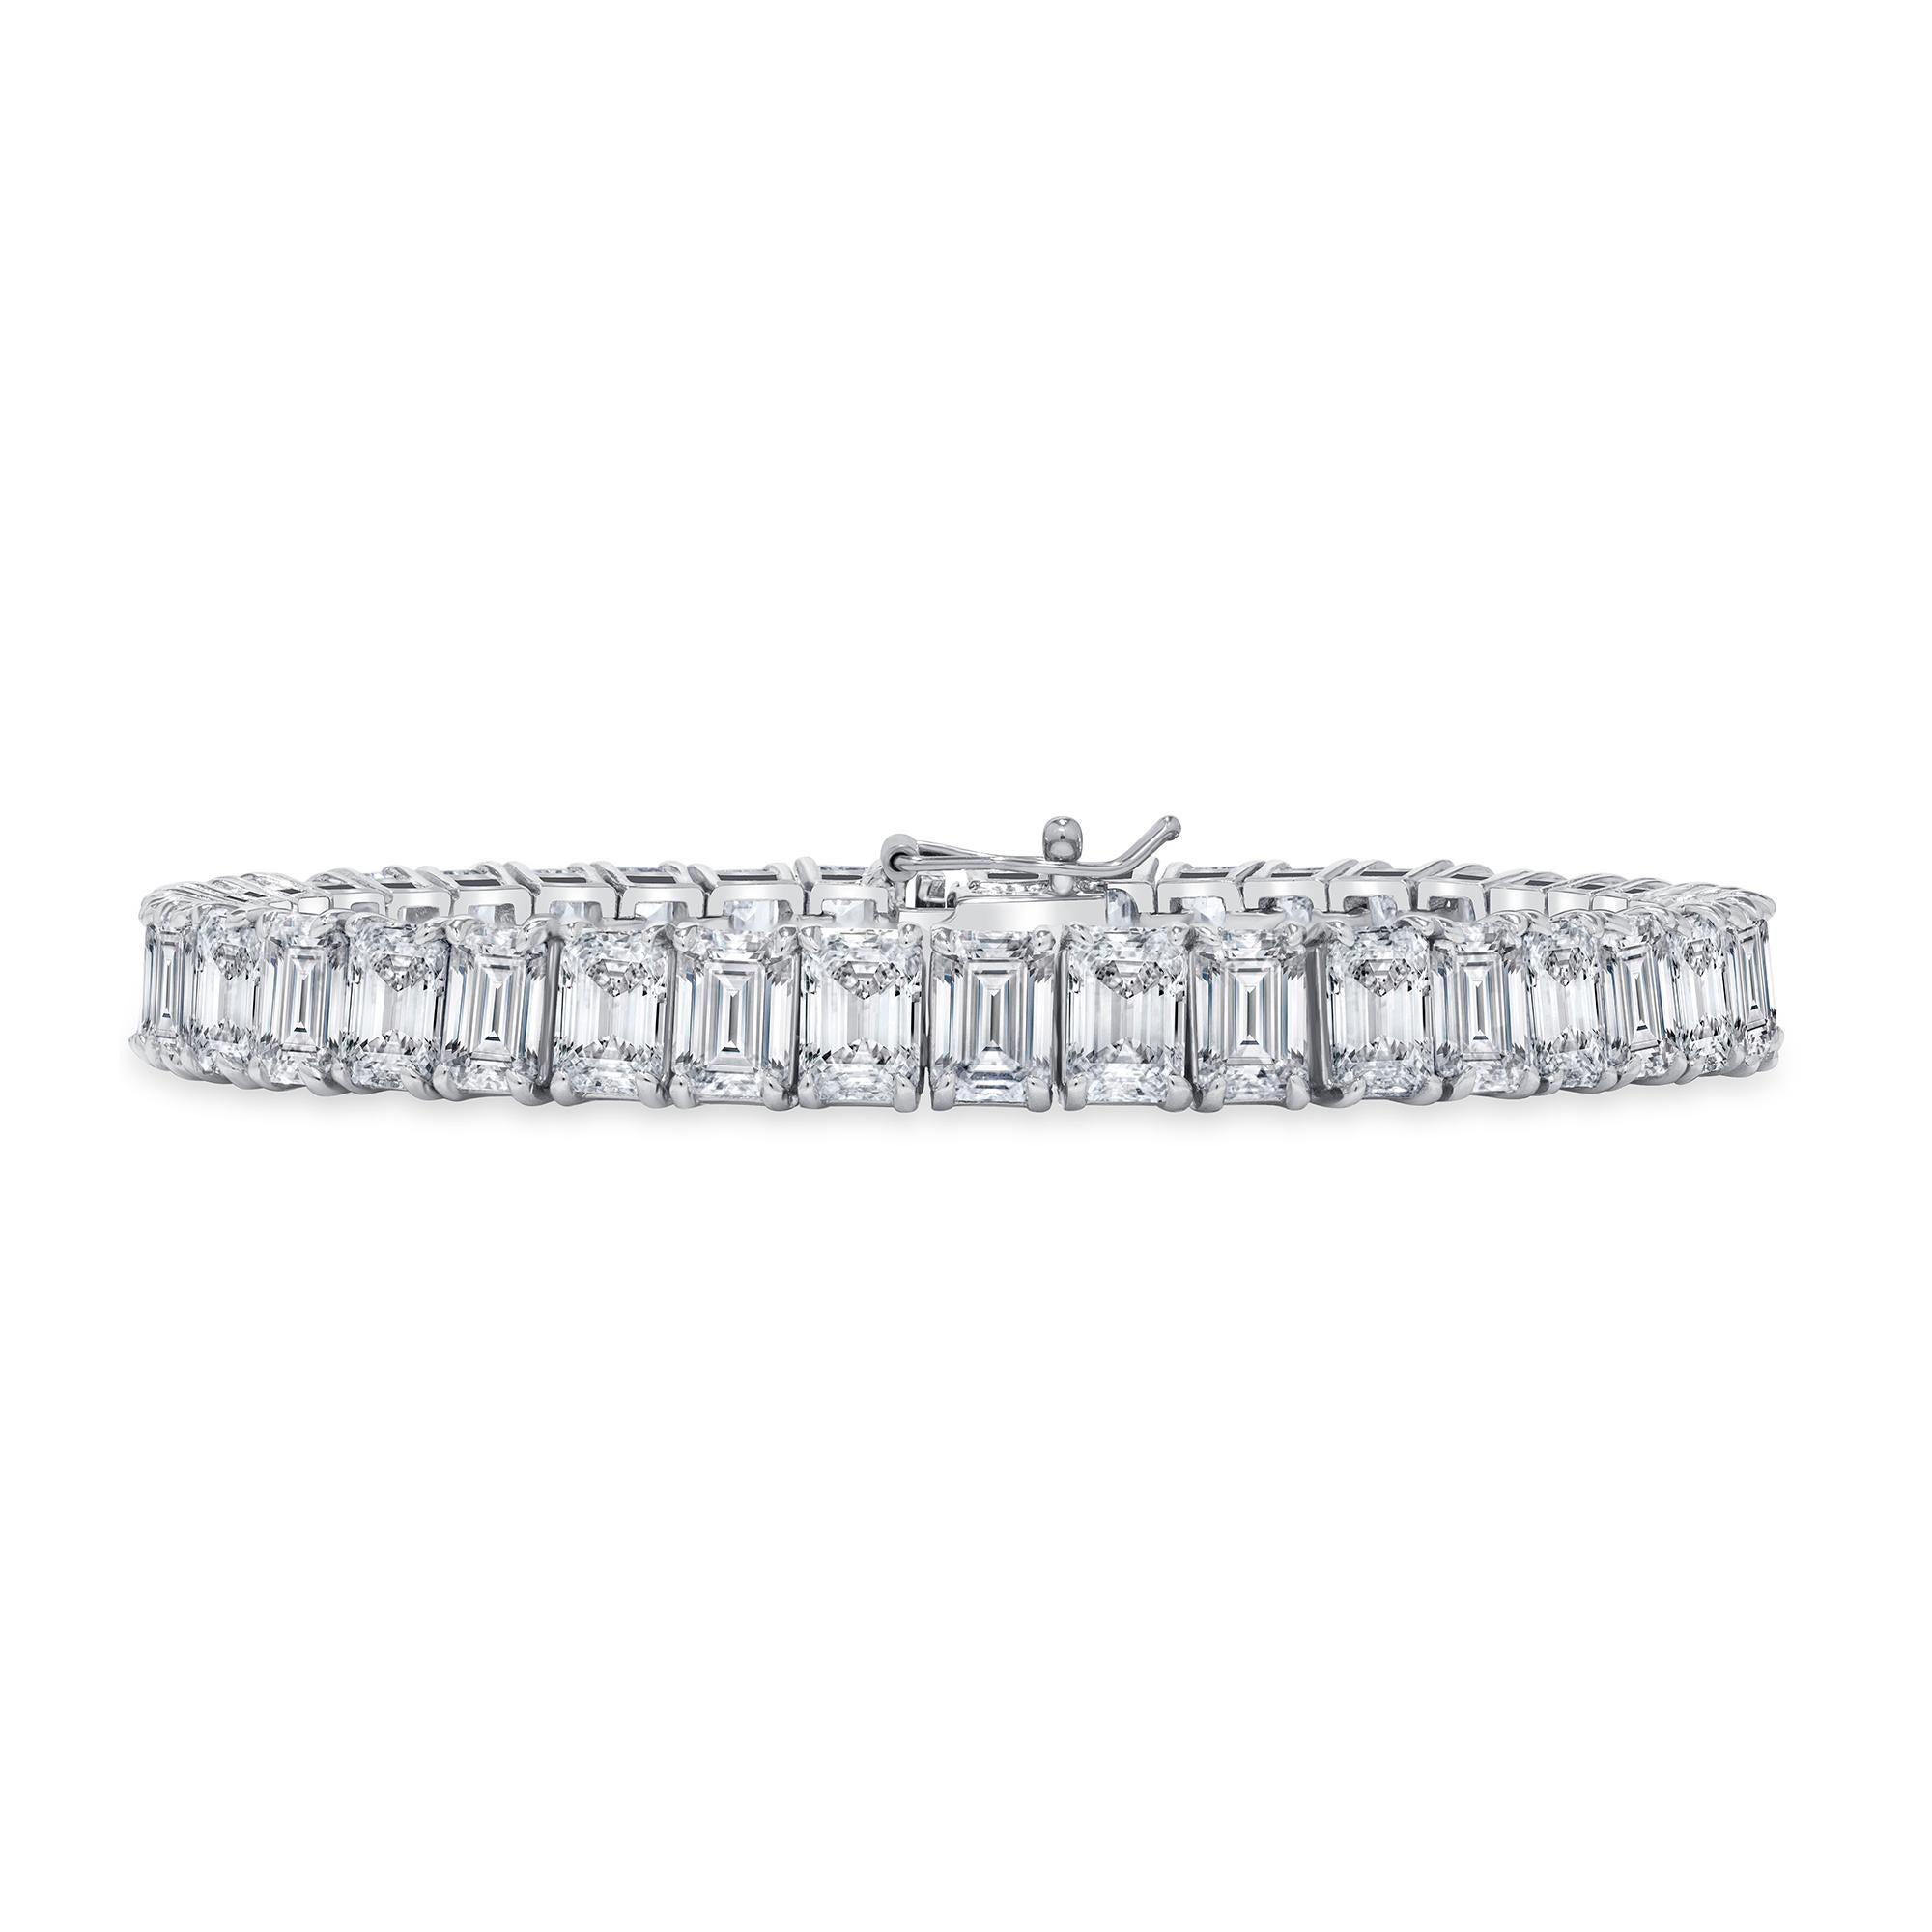 This Emerald Cut diamond tennis bracelet is exquisite. The focal point of this bracelet is the captivating 21.50 carat total weight Emerald Cut Natural diamonds. Each diamond is meticulously selected to match and set in a high polish 14k or 18k